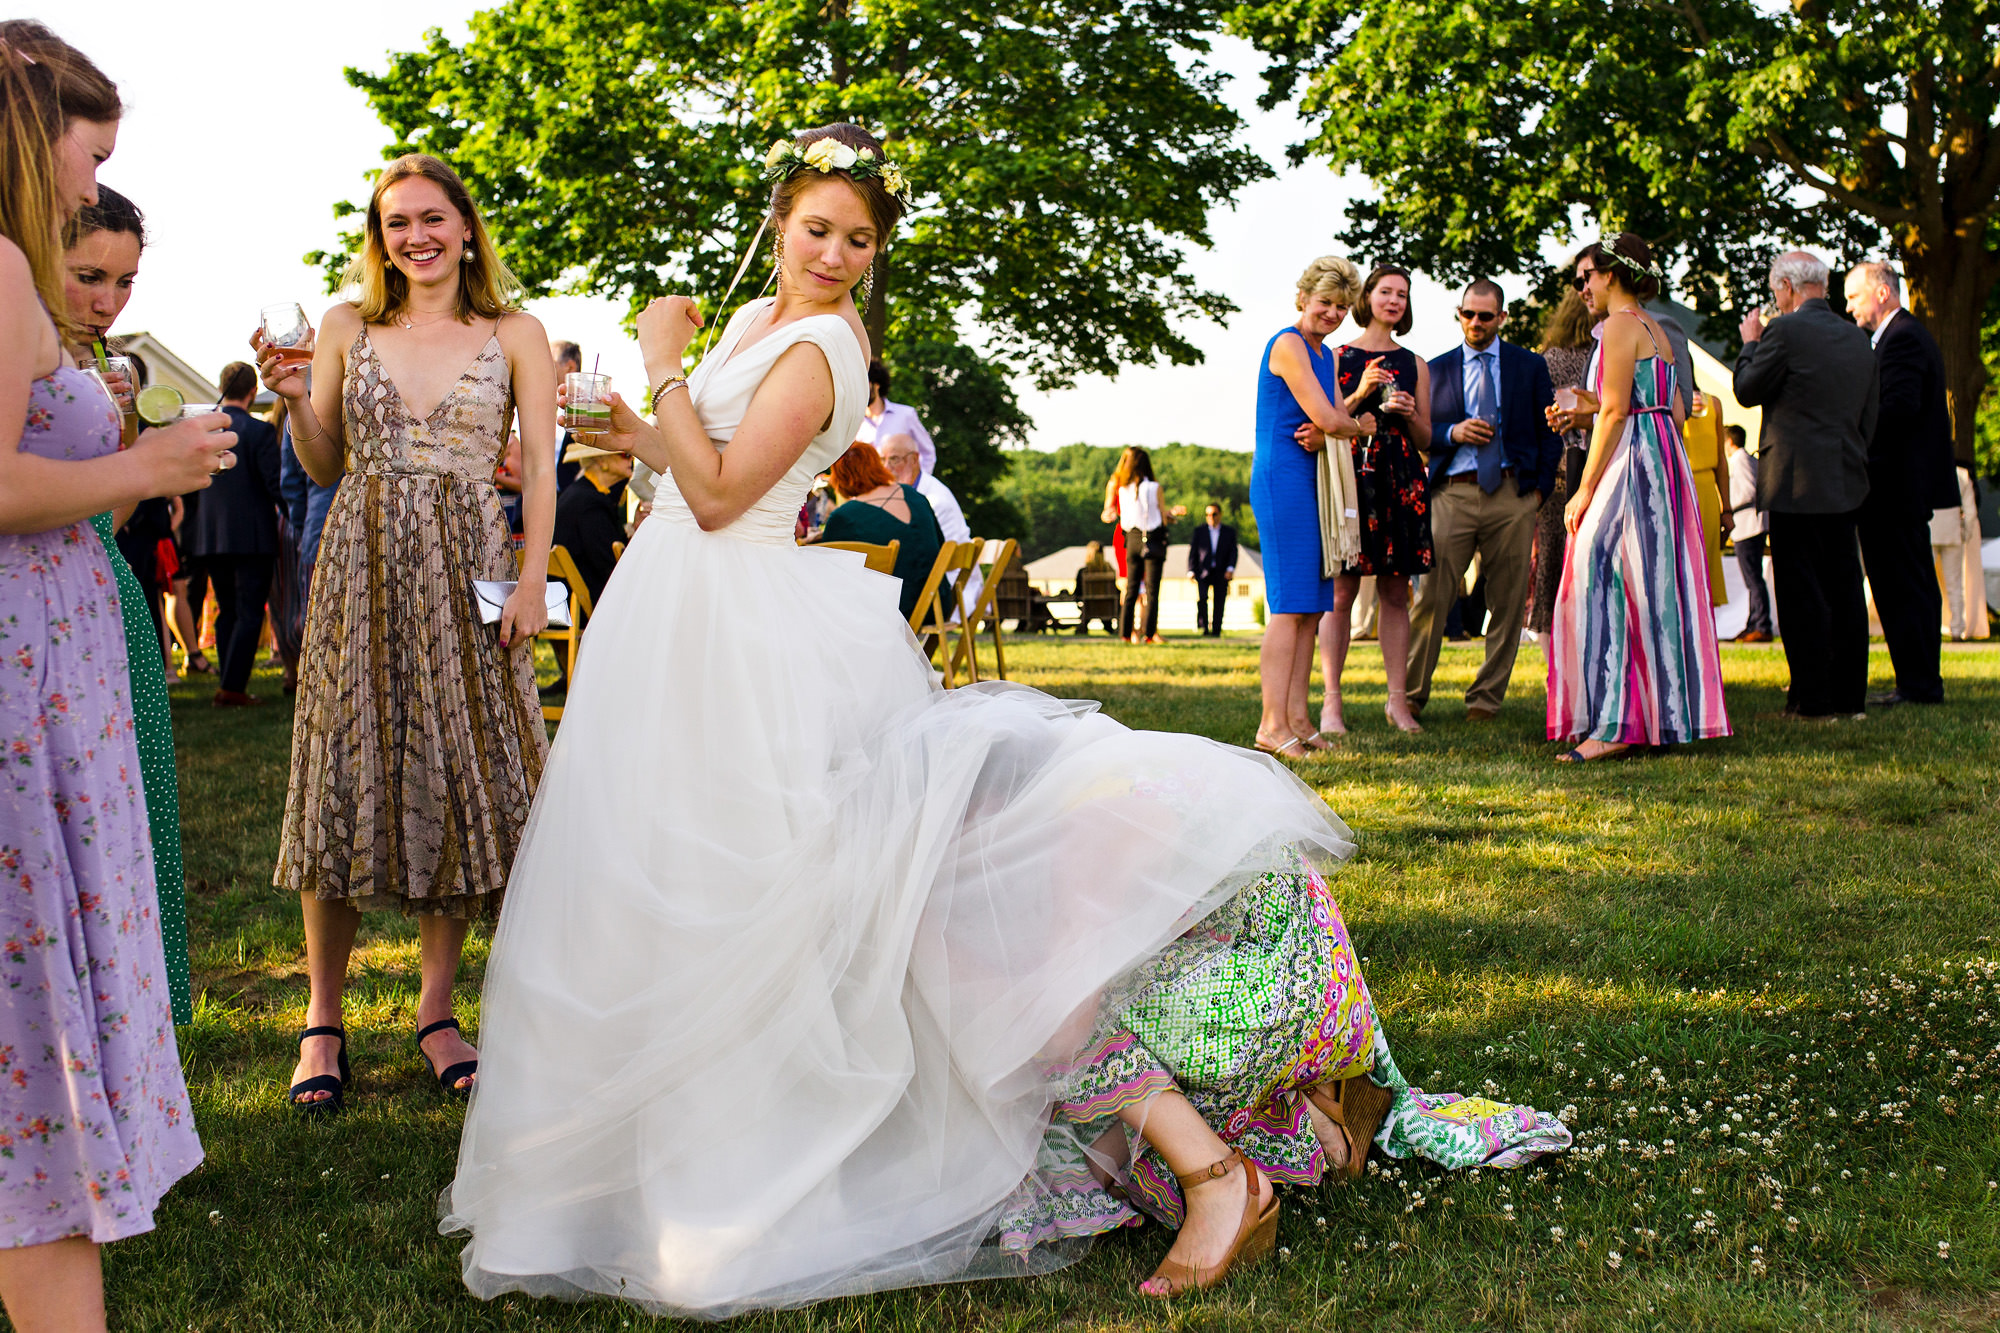 A friend helps the bride with her bustle during cocktail hour, making her look like a centaur.